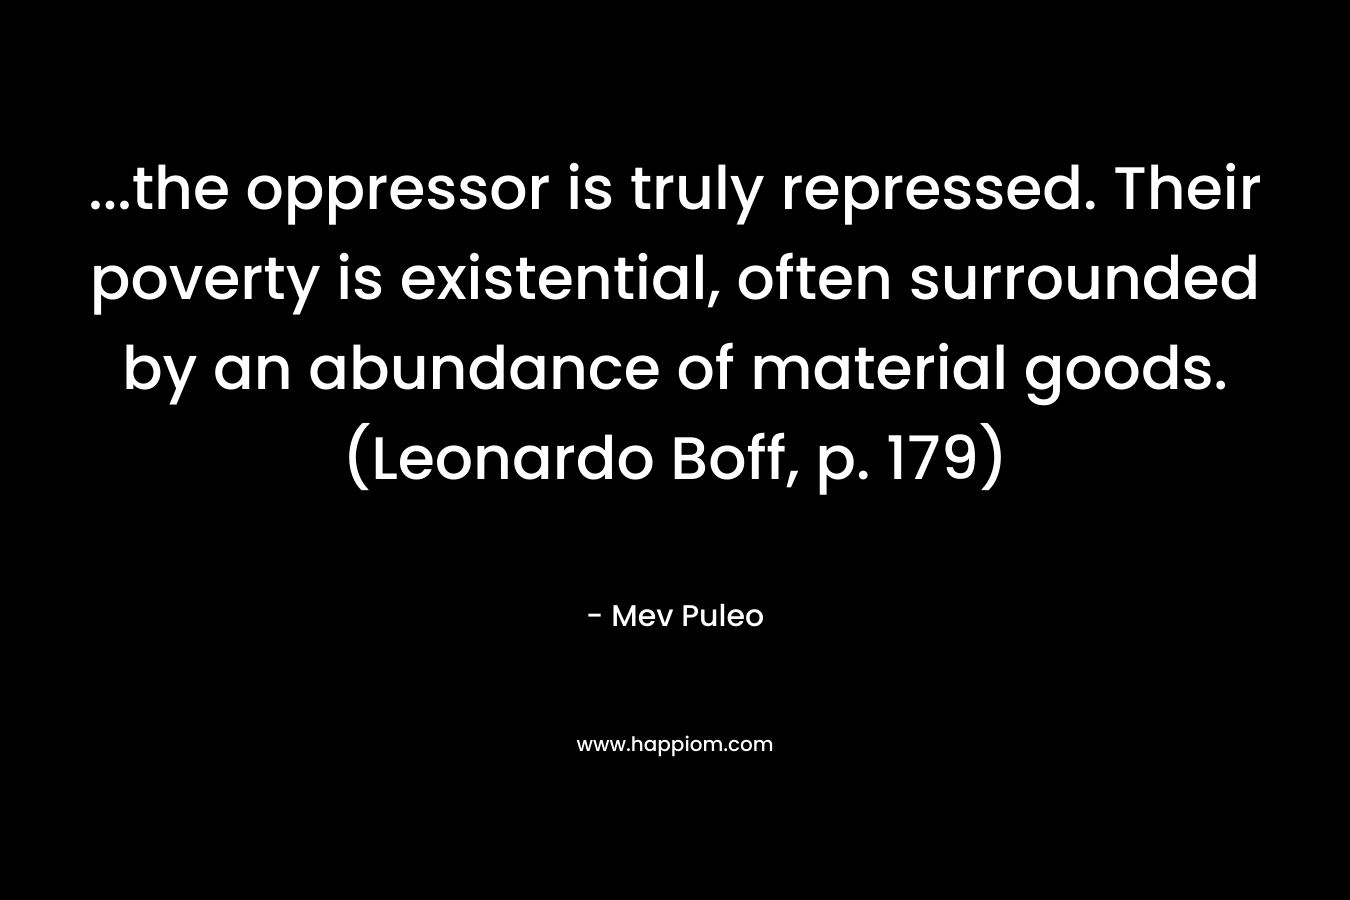 …the oppressor is truly repressed. Their poverty is existential, often surrounded by an abundance of material goods. (Leonardo Boff, p. 179) – Mev Puleo